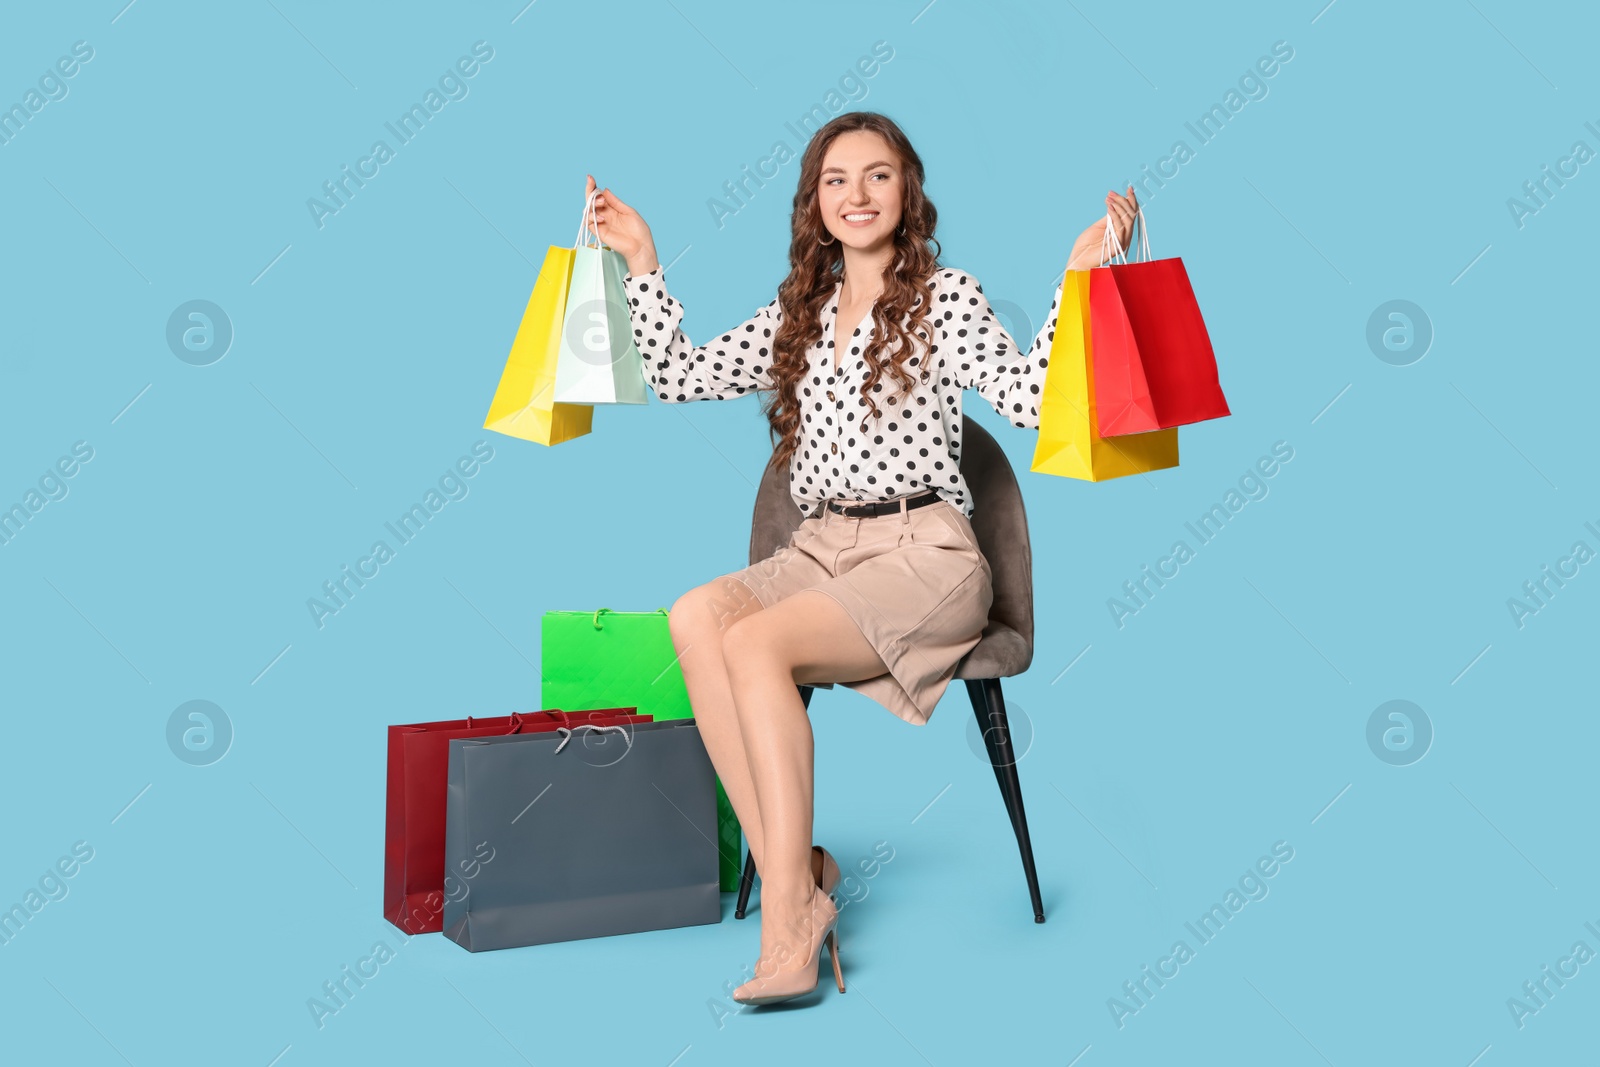 Photo of Happy woman holding colorful shopping bags on chair against light blue background